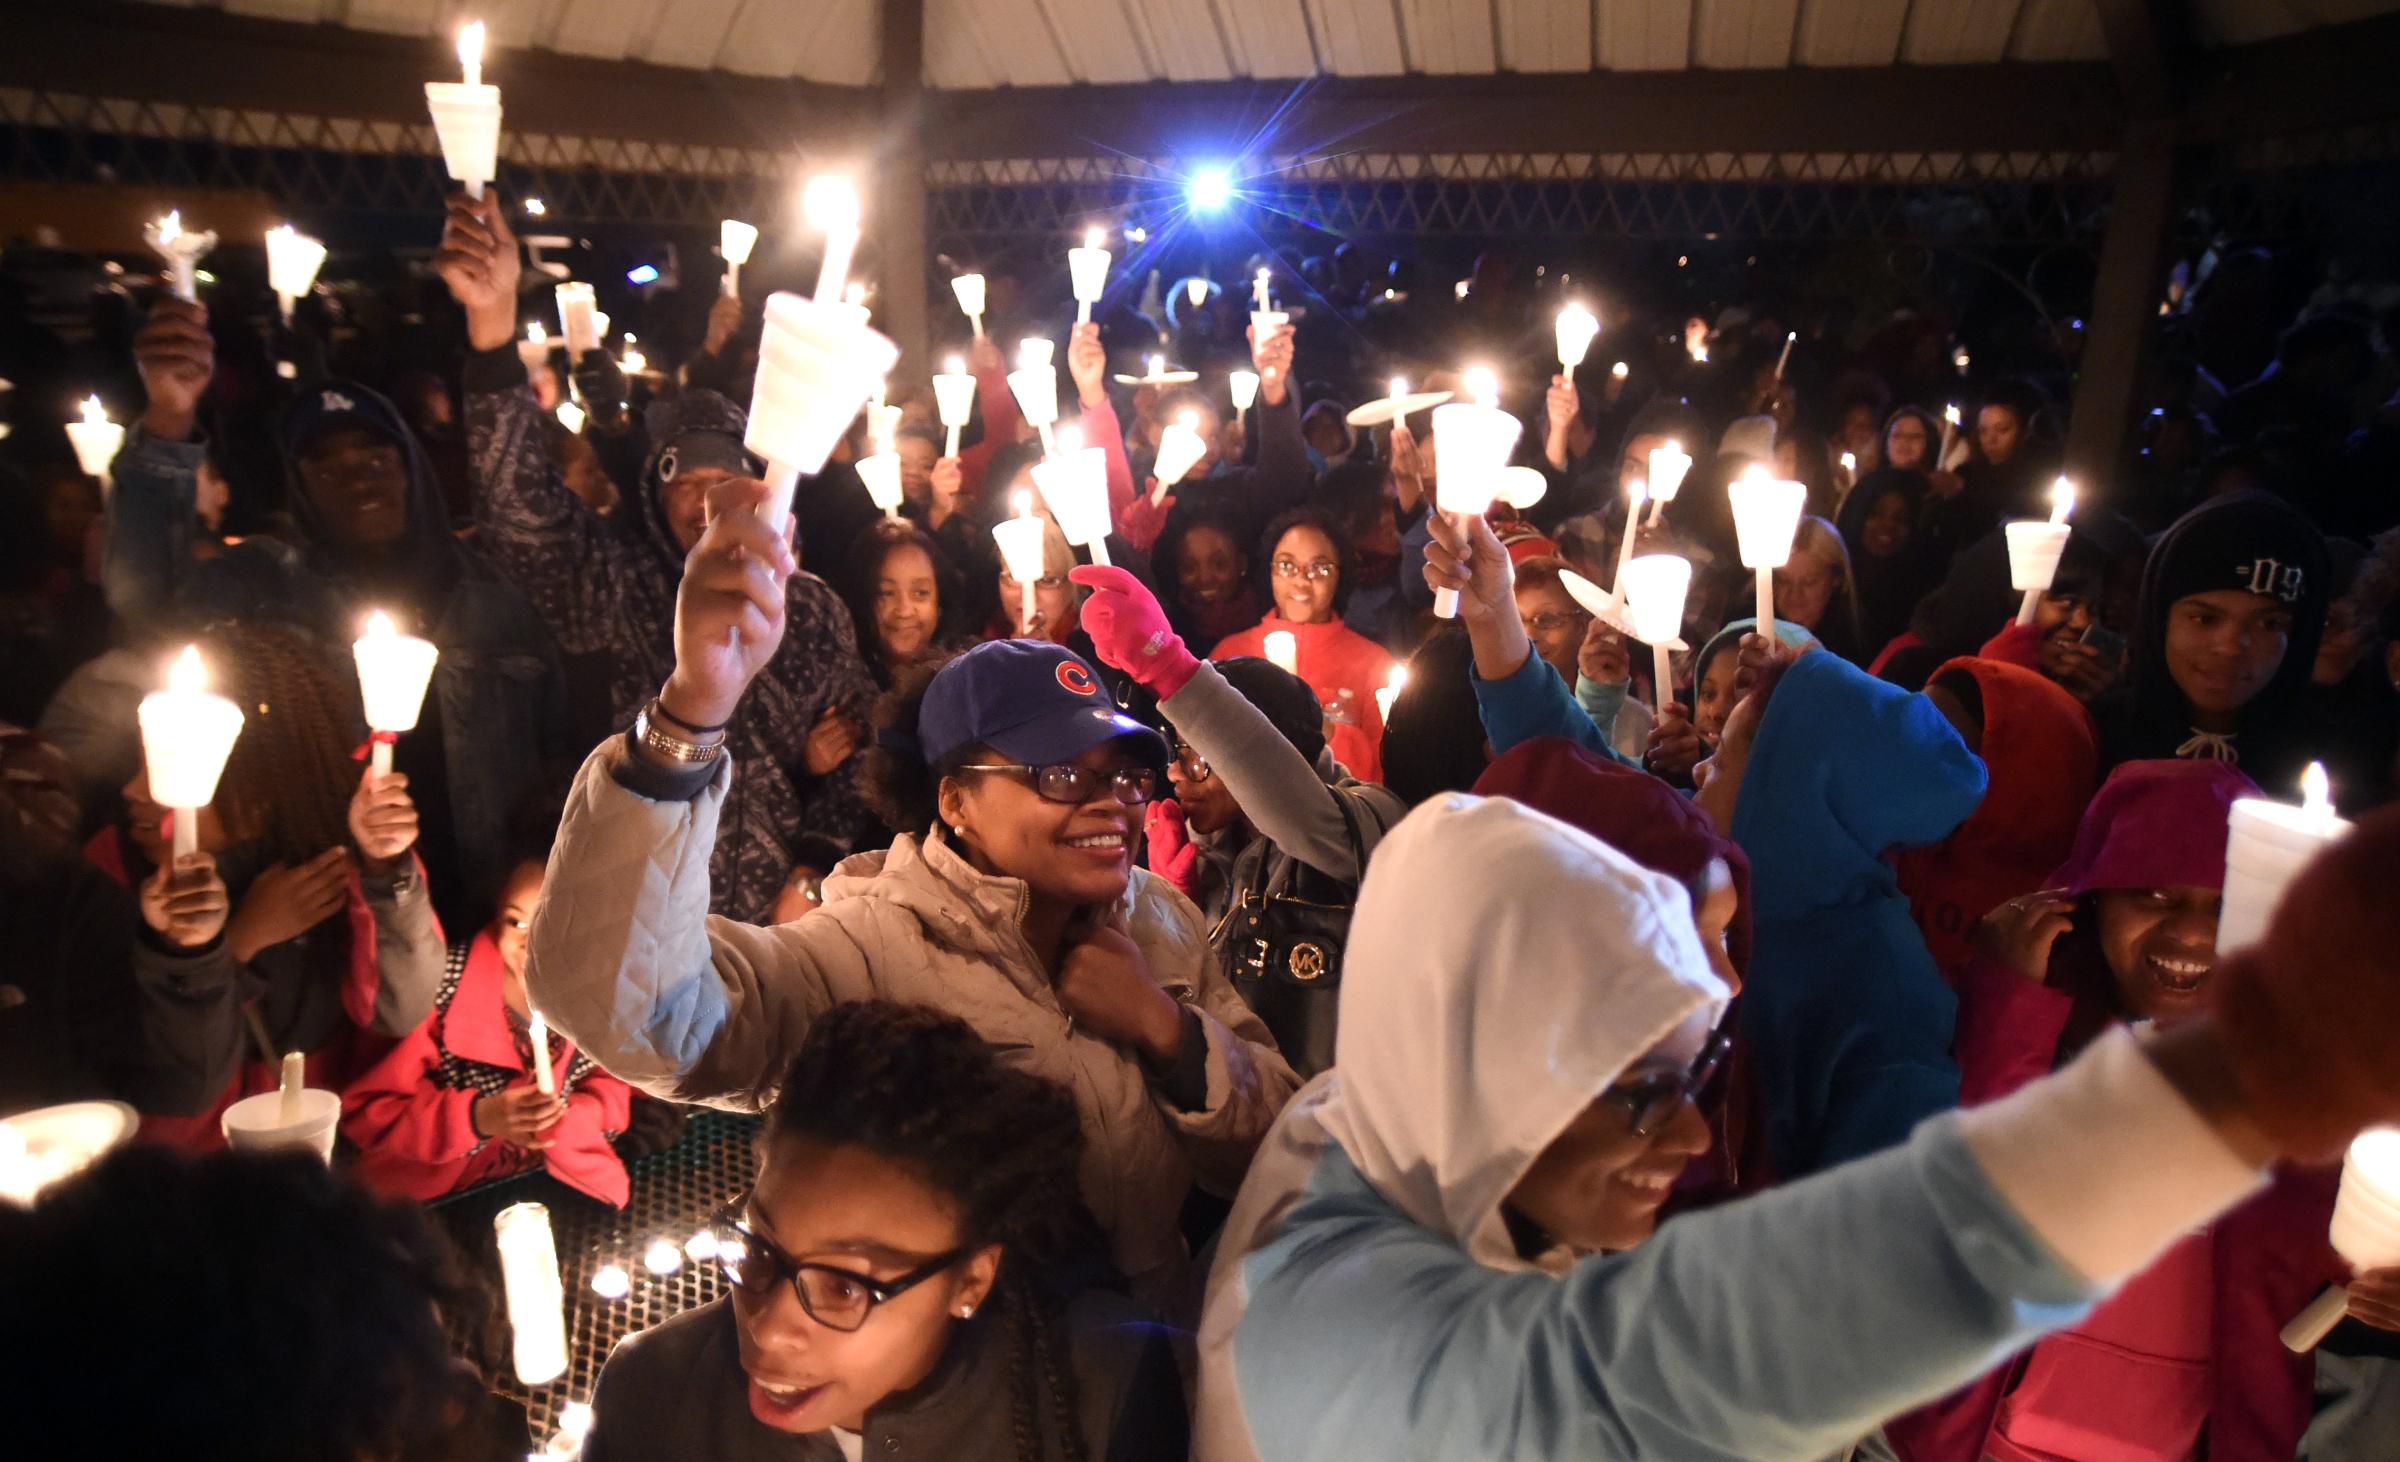 Attendees raise candles to celebrate the life of Zaevion Dobson at Sam E. Hill Park in Knoxville, Tenn., on Dec. 18, 2015.